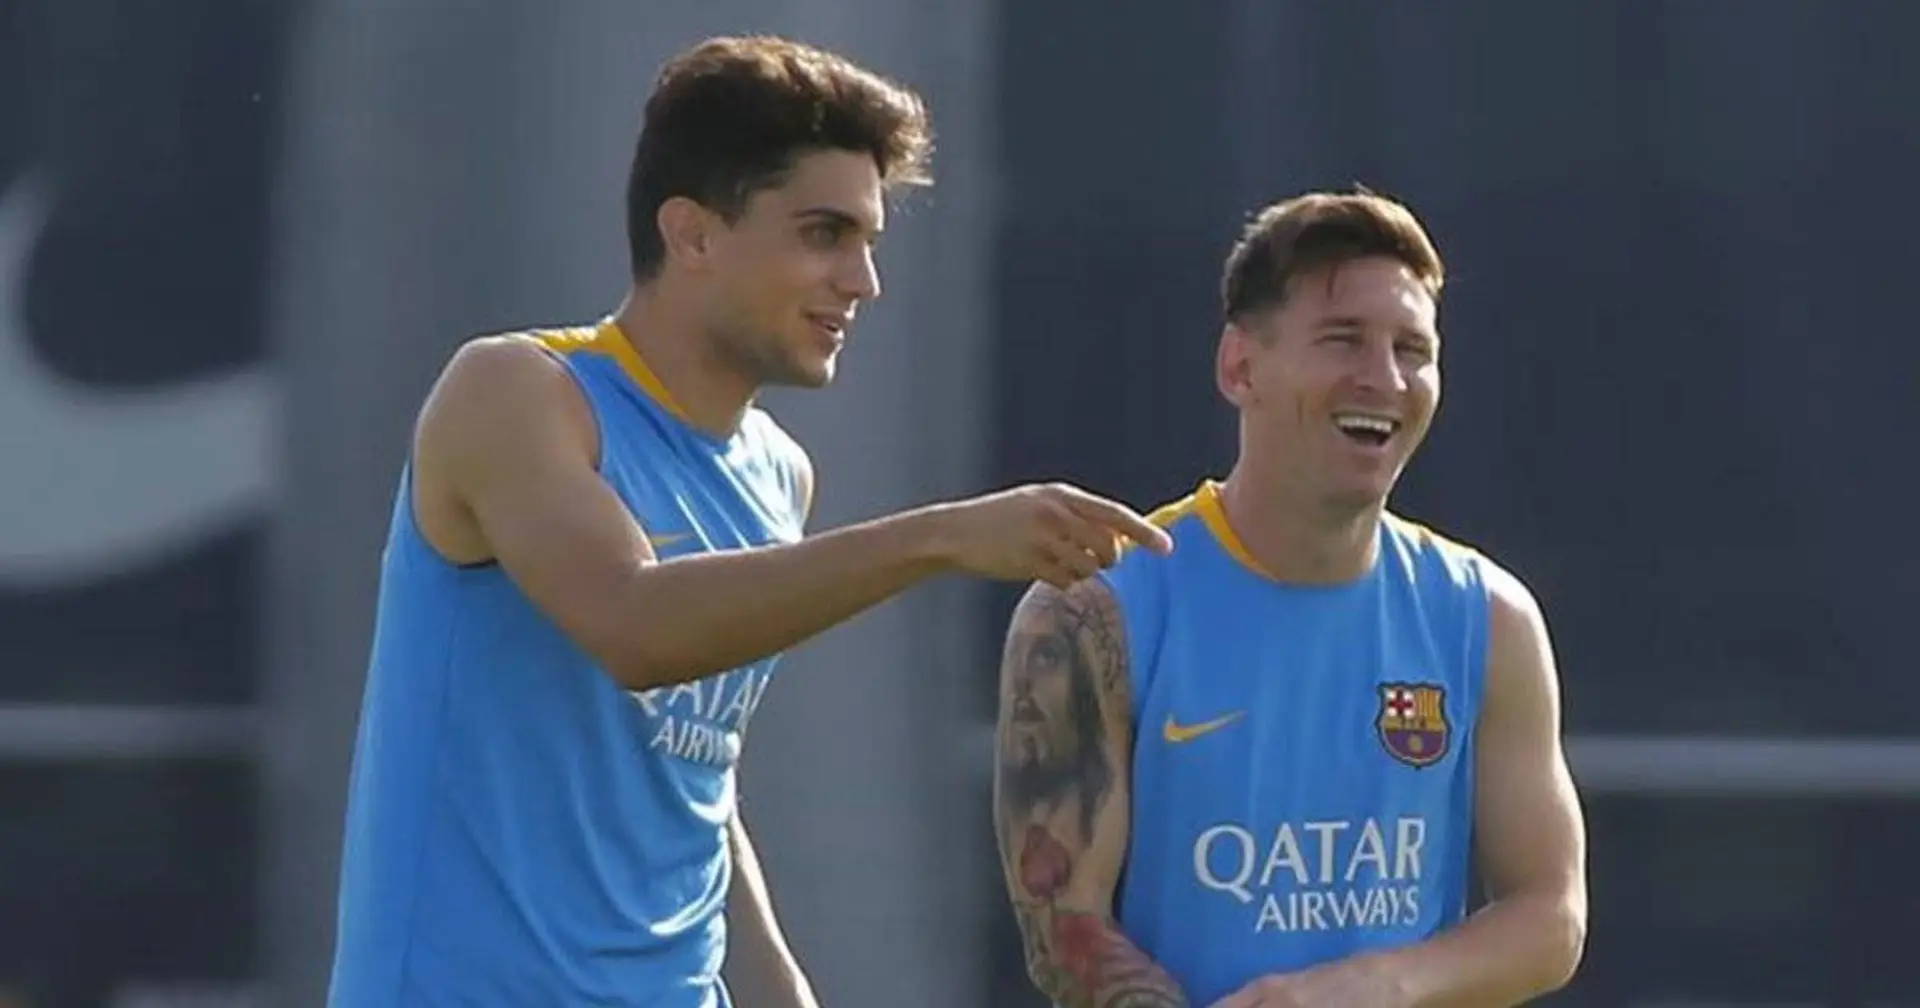 'There’s been no one better than him, neither now nor in the past': Marc Bartra on Leo Messi